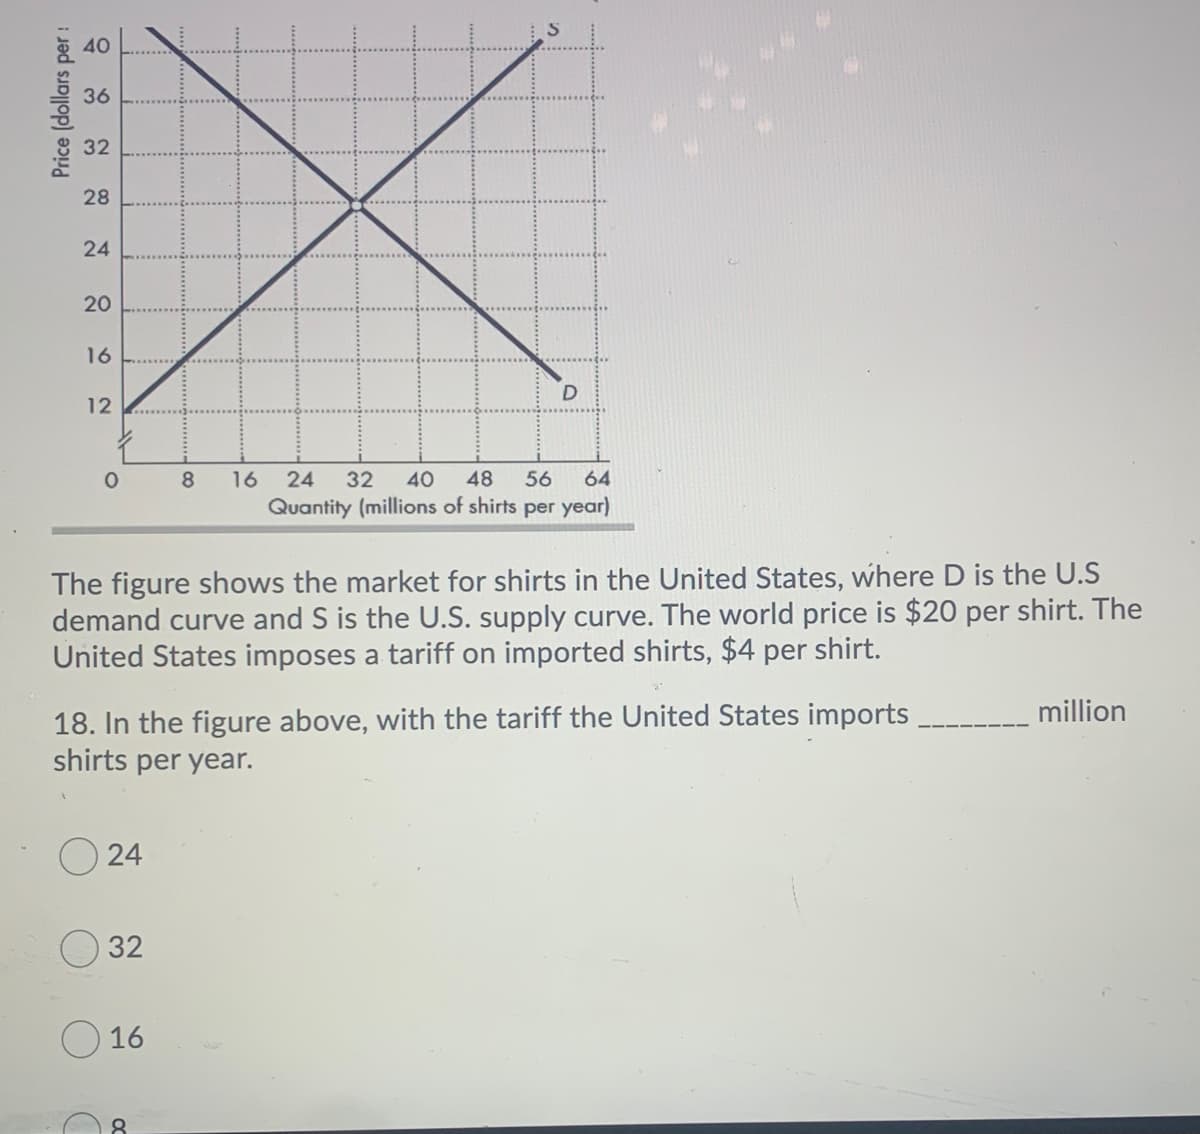 40
36
32
28
24
20
16
D
12
8
16
24
32
40
48
56
64
Quantity (millions of shirts per year)
The figure shows the market for shirts in the United States, where D is the U.S
demand curve and S is the U.S. supply curve. The world price is $20 per shirt. The
United States imposes a tariff on imported shirts, $4 per shirt.
18. In the figure above, with the tariff the United States imports
shirts per year.
million
O 24
32
16
Price (dollars per :
